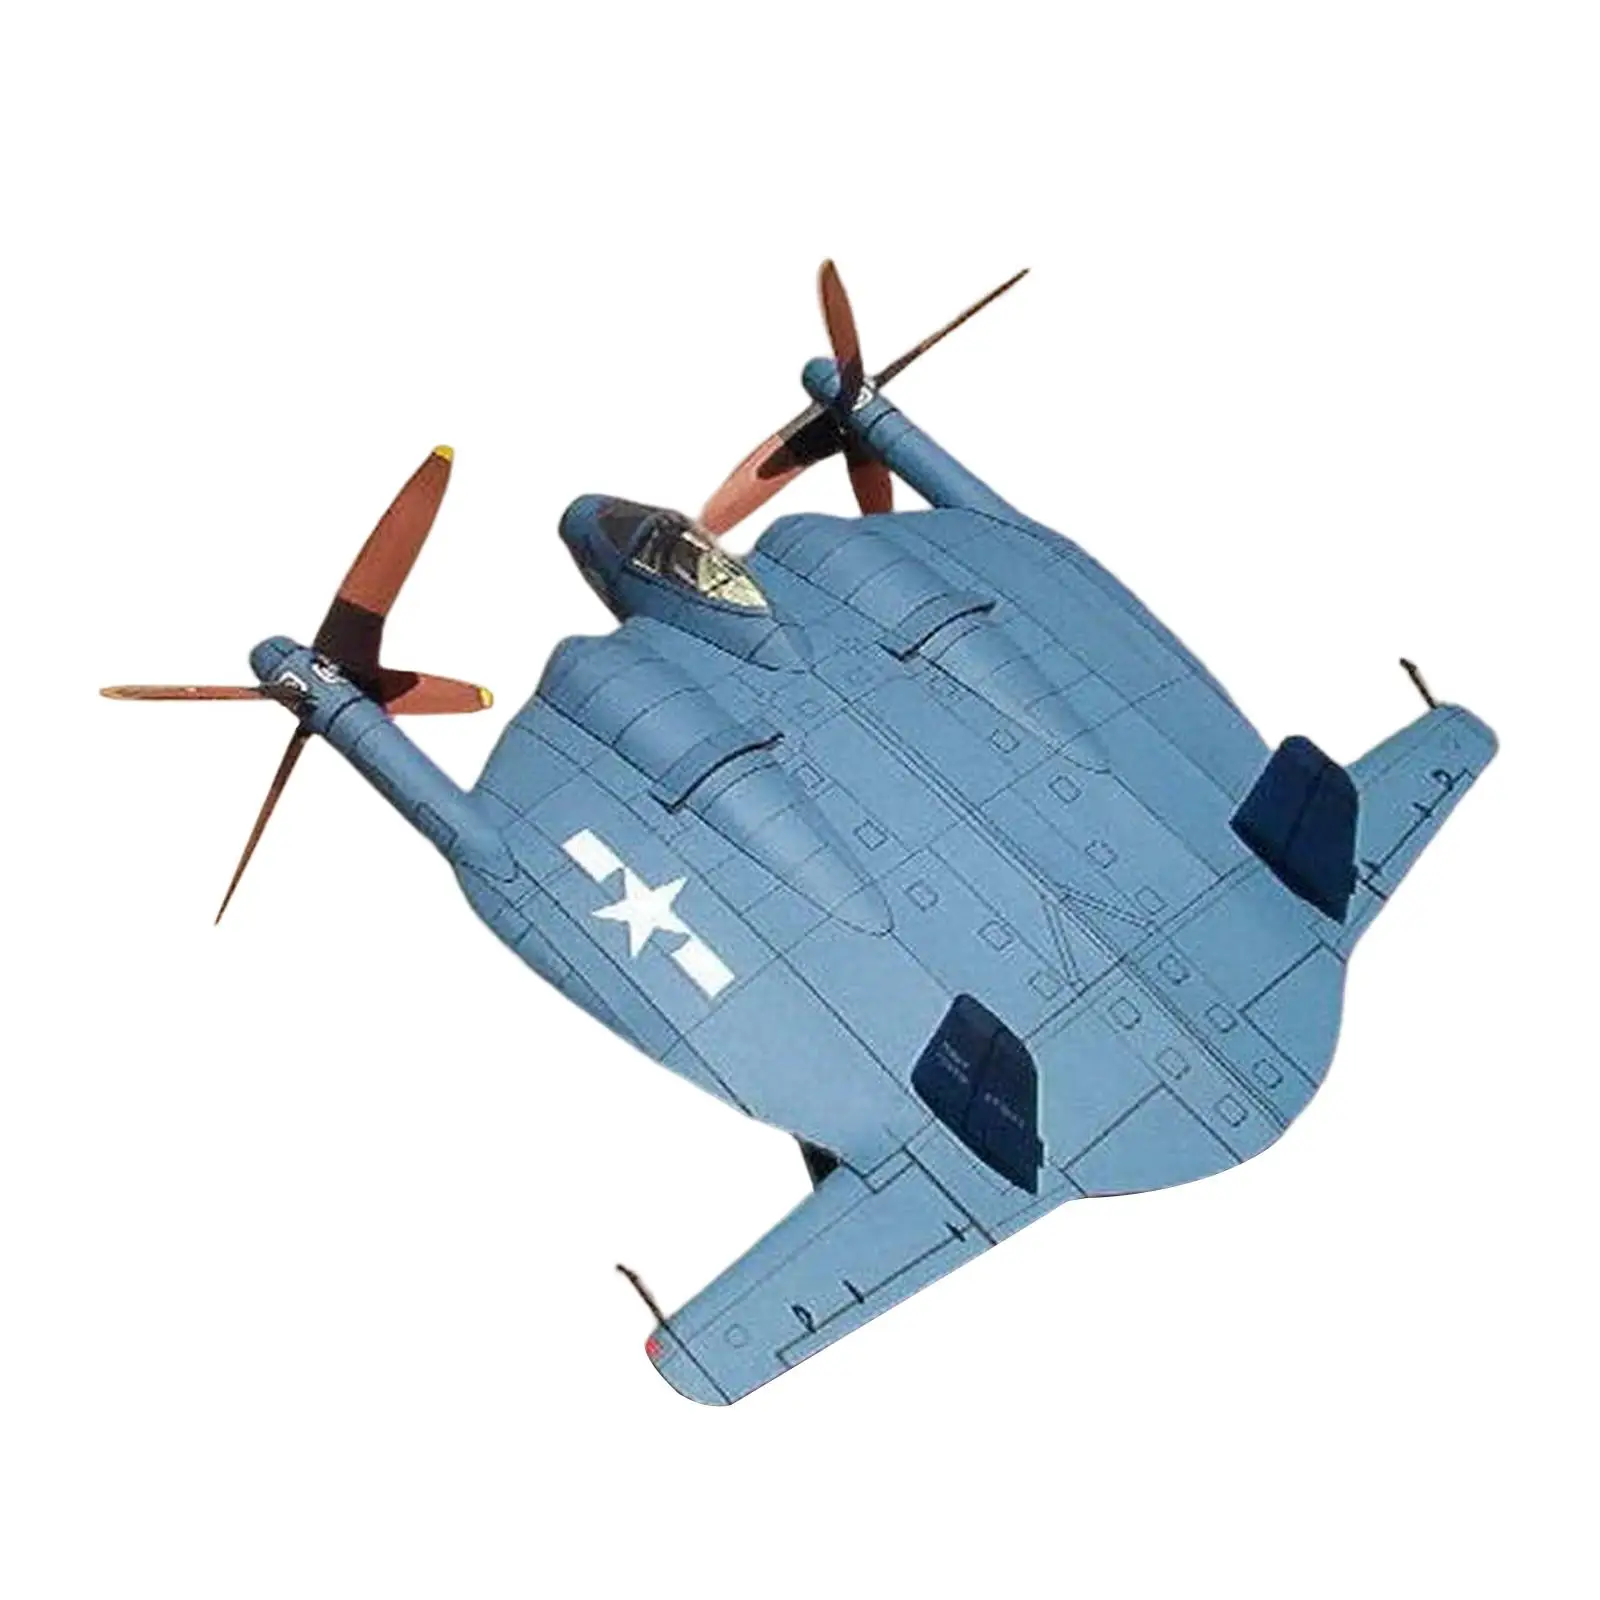 Air Aviation aircraft Paper Model Adults Collectables Simulation Papercraft Fighter Model Toy for Desk Shelf Decoration